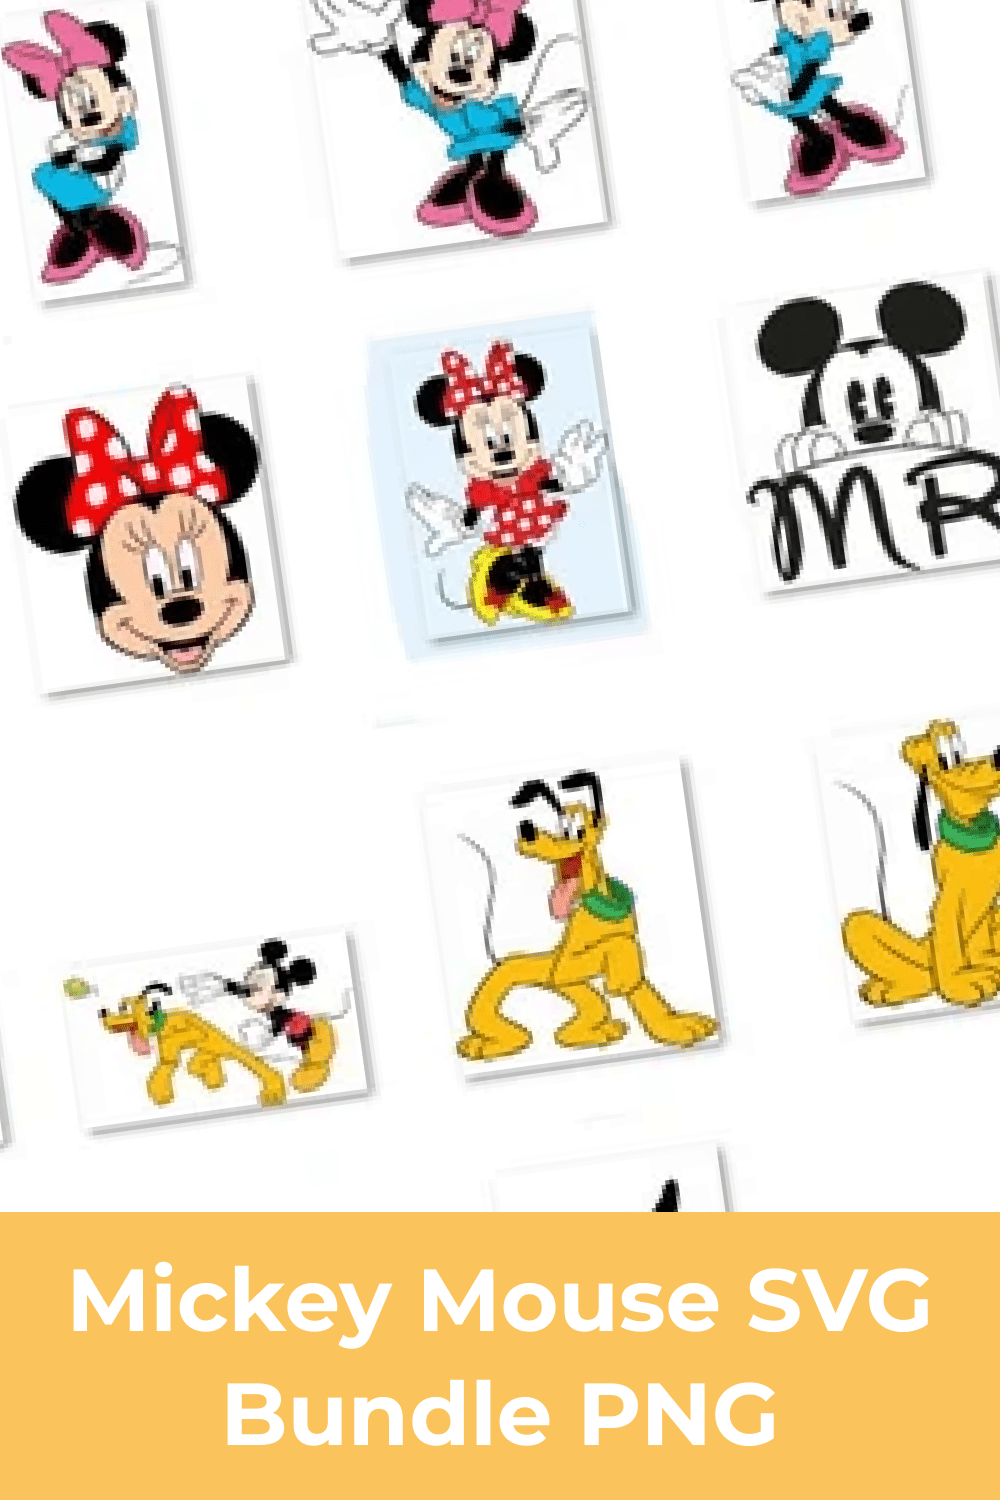 Lovely Mickey Mouse characters in the one bundle.